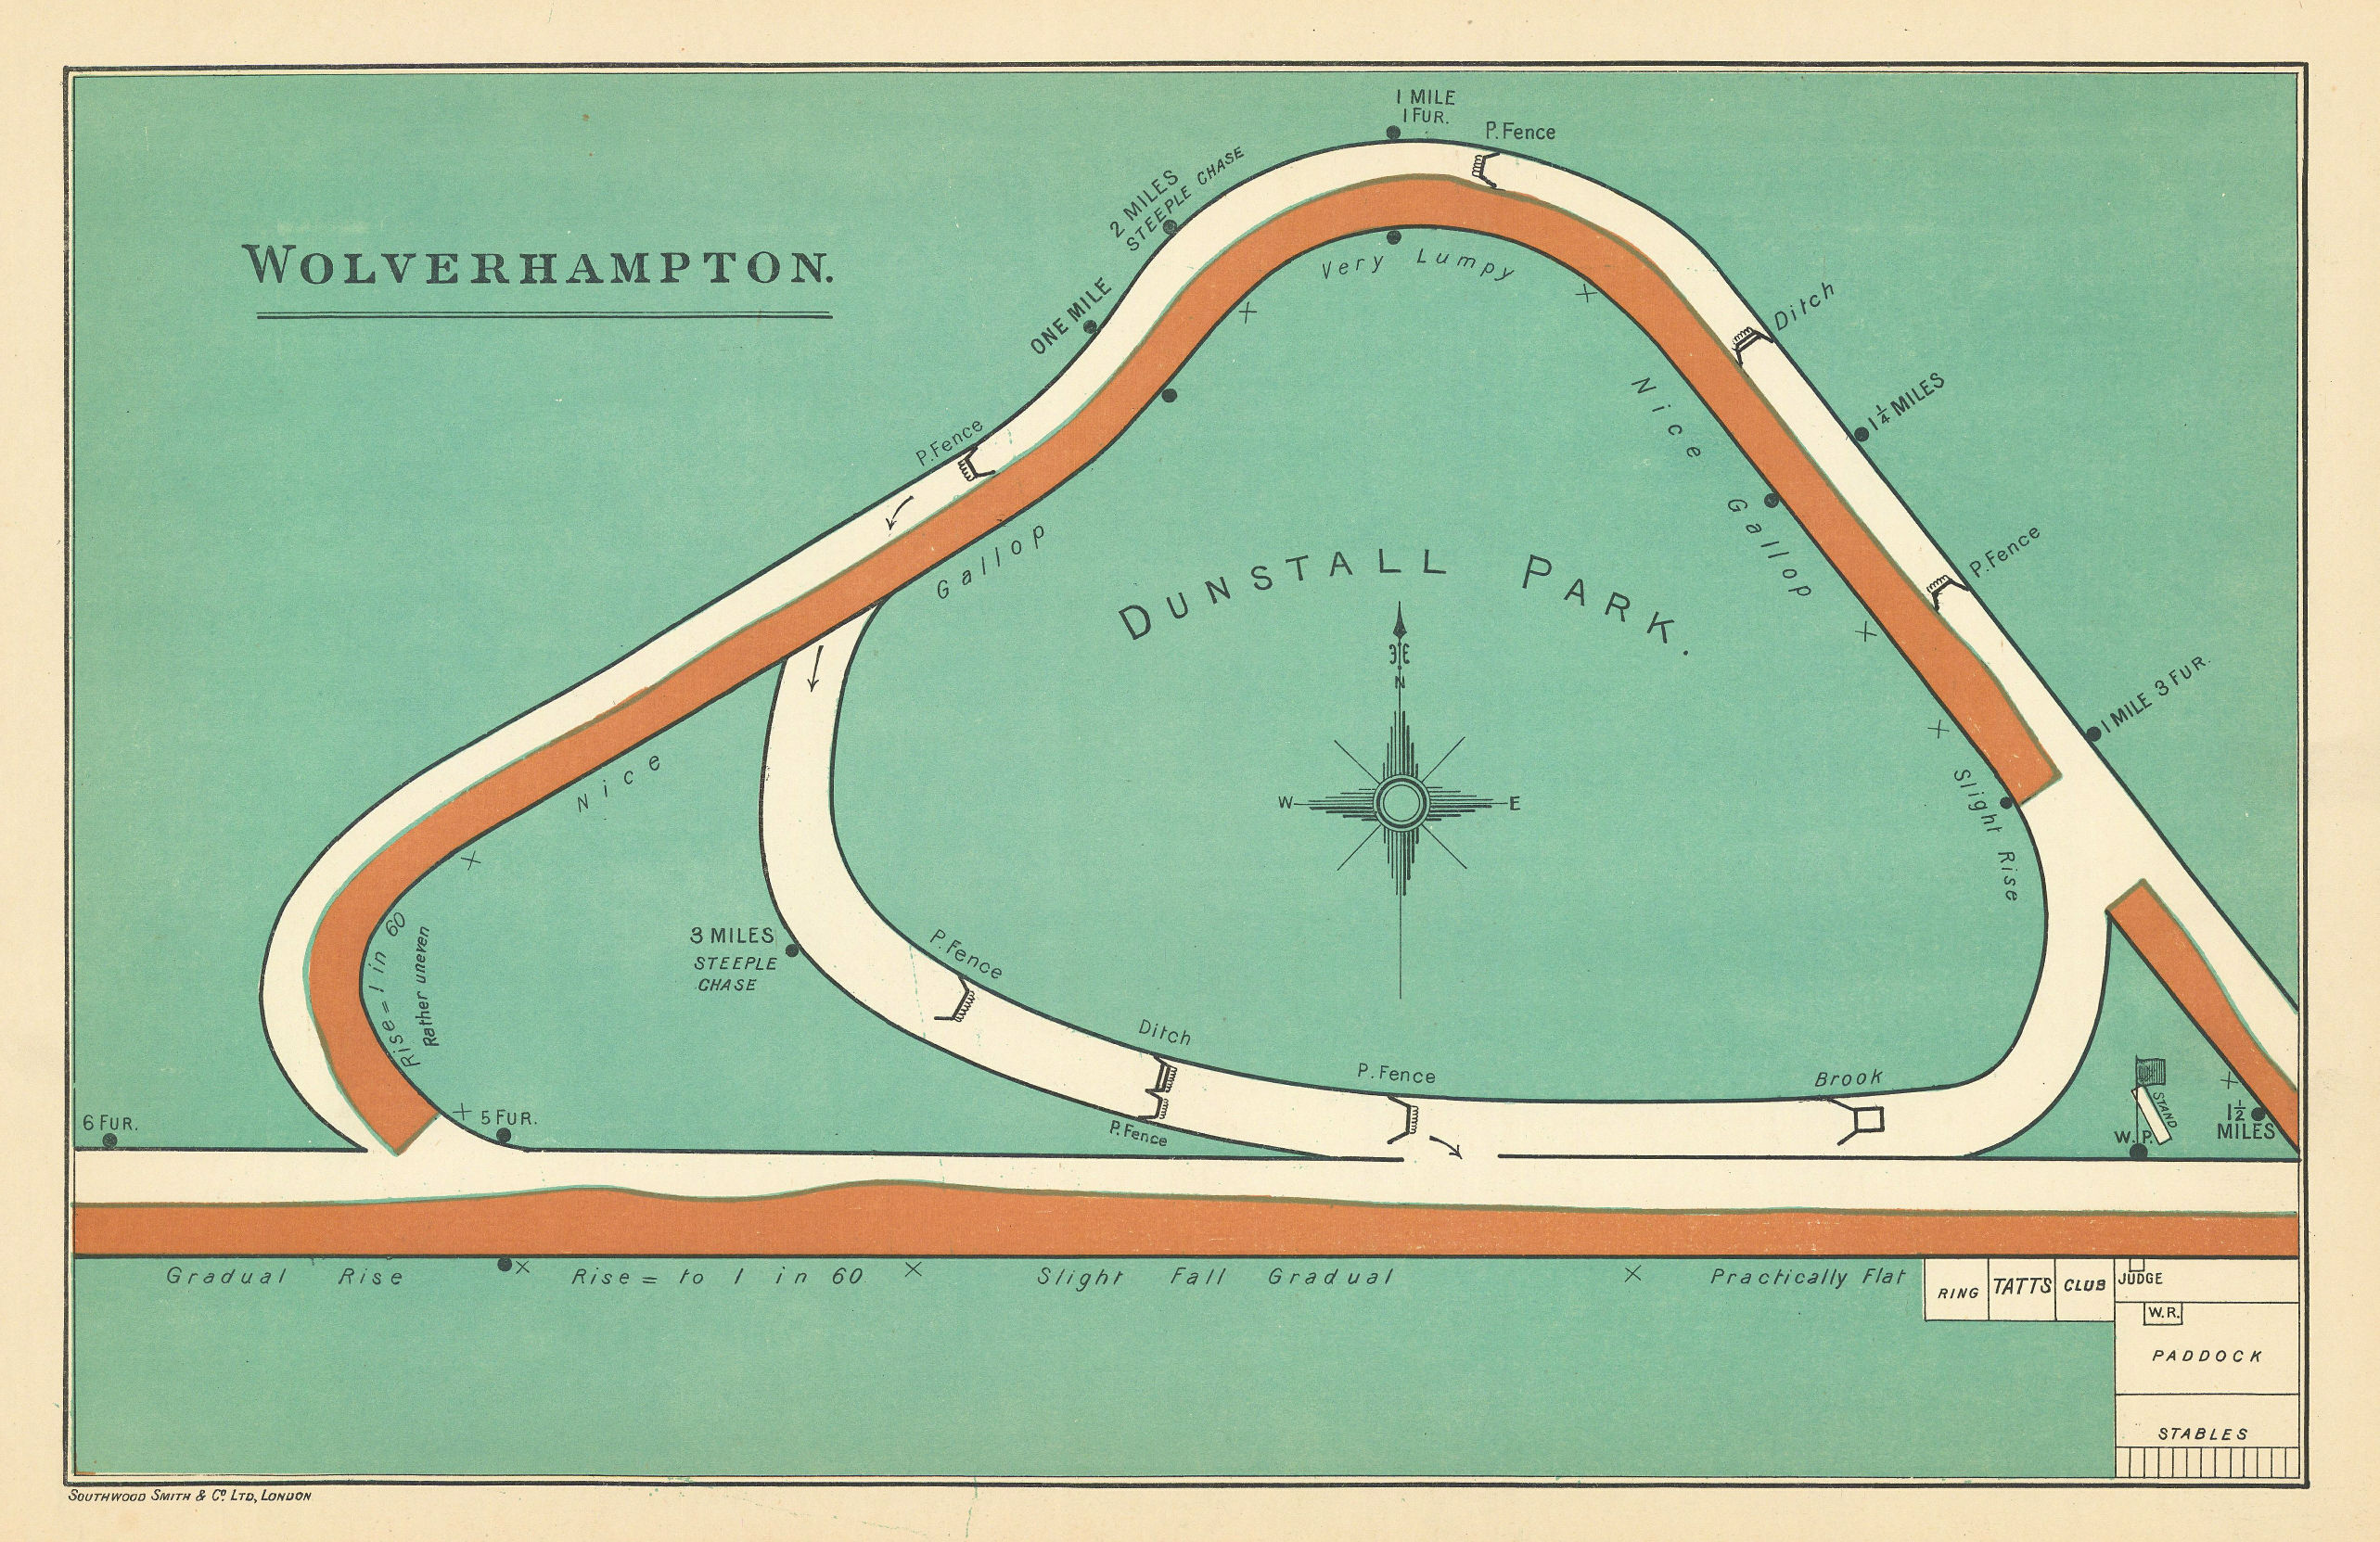 Associate Product Wolverhampton - Dunstall Park racecourse, Staffordshire. BAYLES 1903 old map